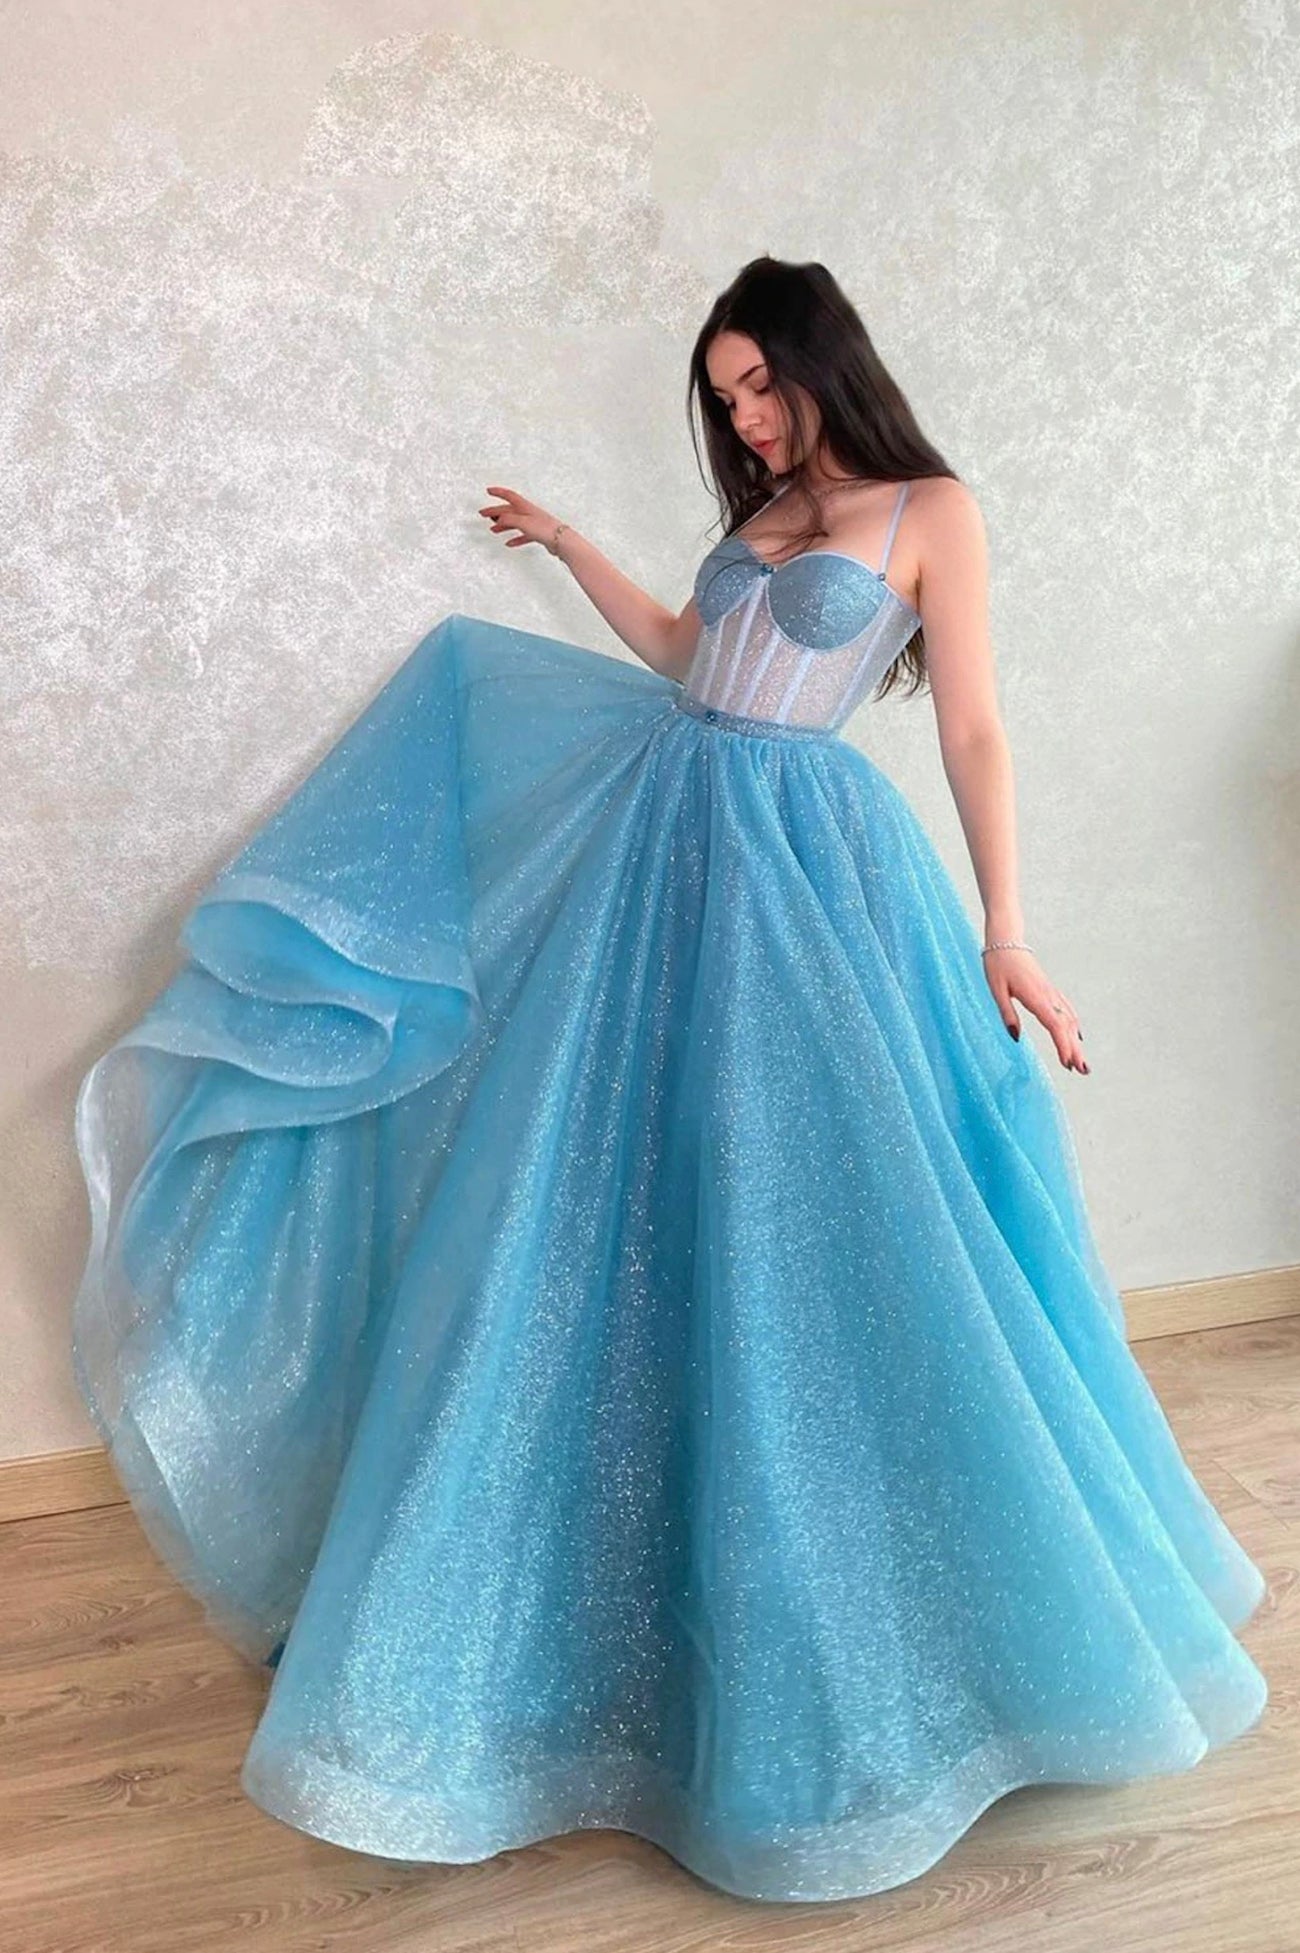 Blue Tulle Long A-Line Prom Dress, Blue Lace-Up Evening Dress with Corset